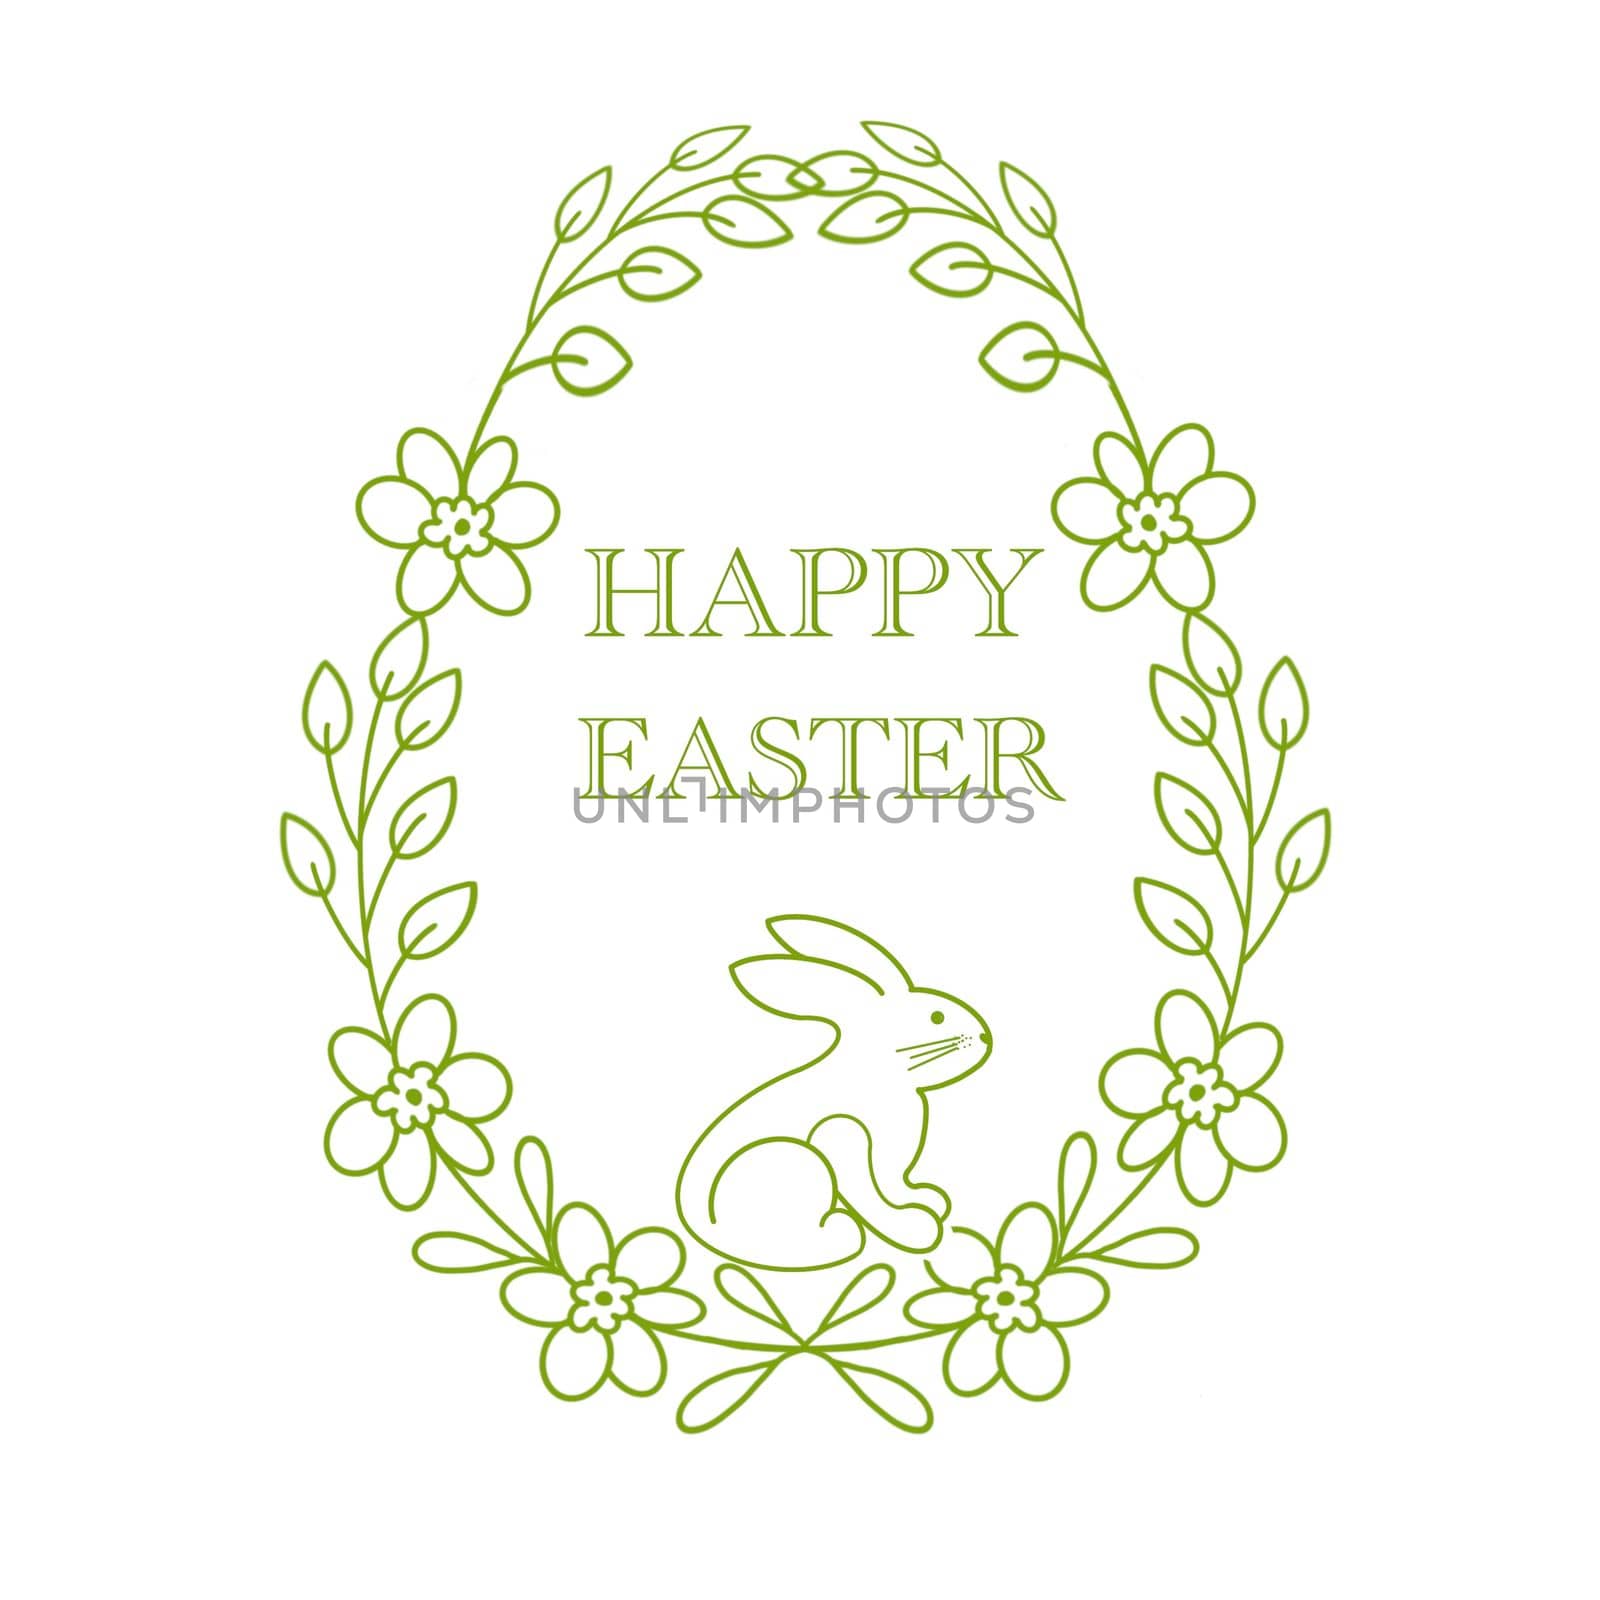 Floral banner with happy easter bunny. Illustration on a white background. by Olga_OLiAN